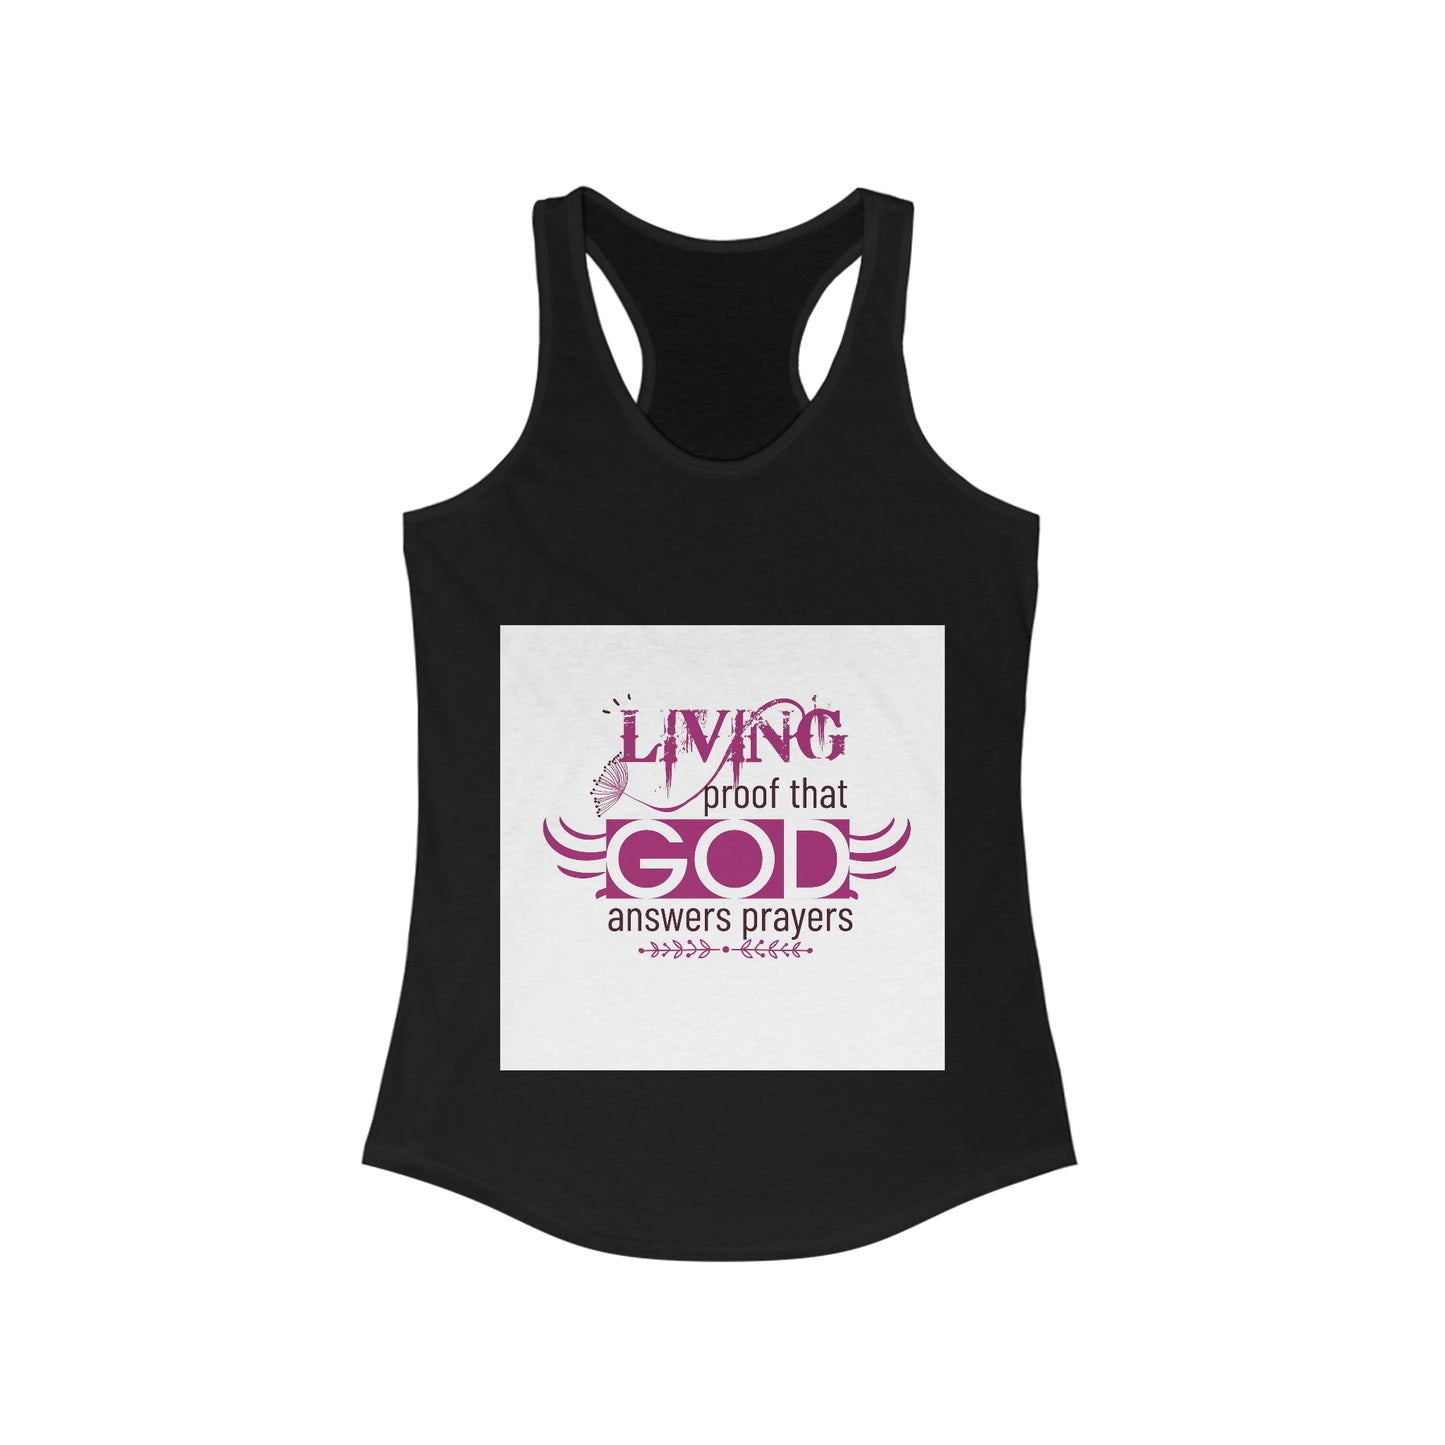 Living Proof That God Answers Prayers slim fit tank-top